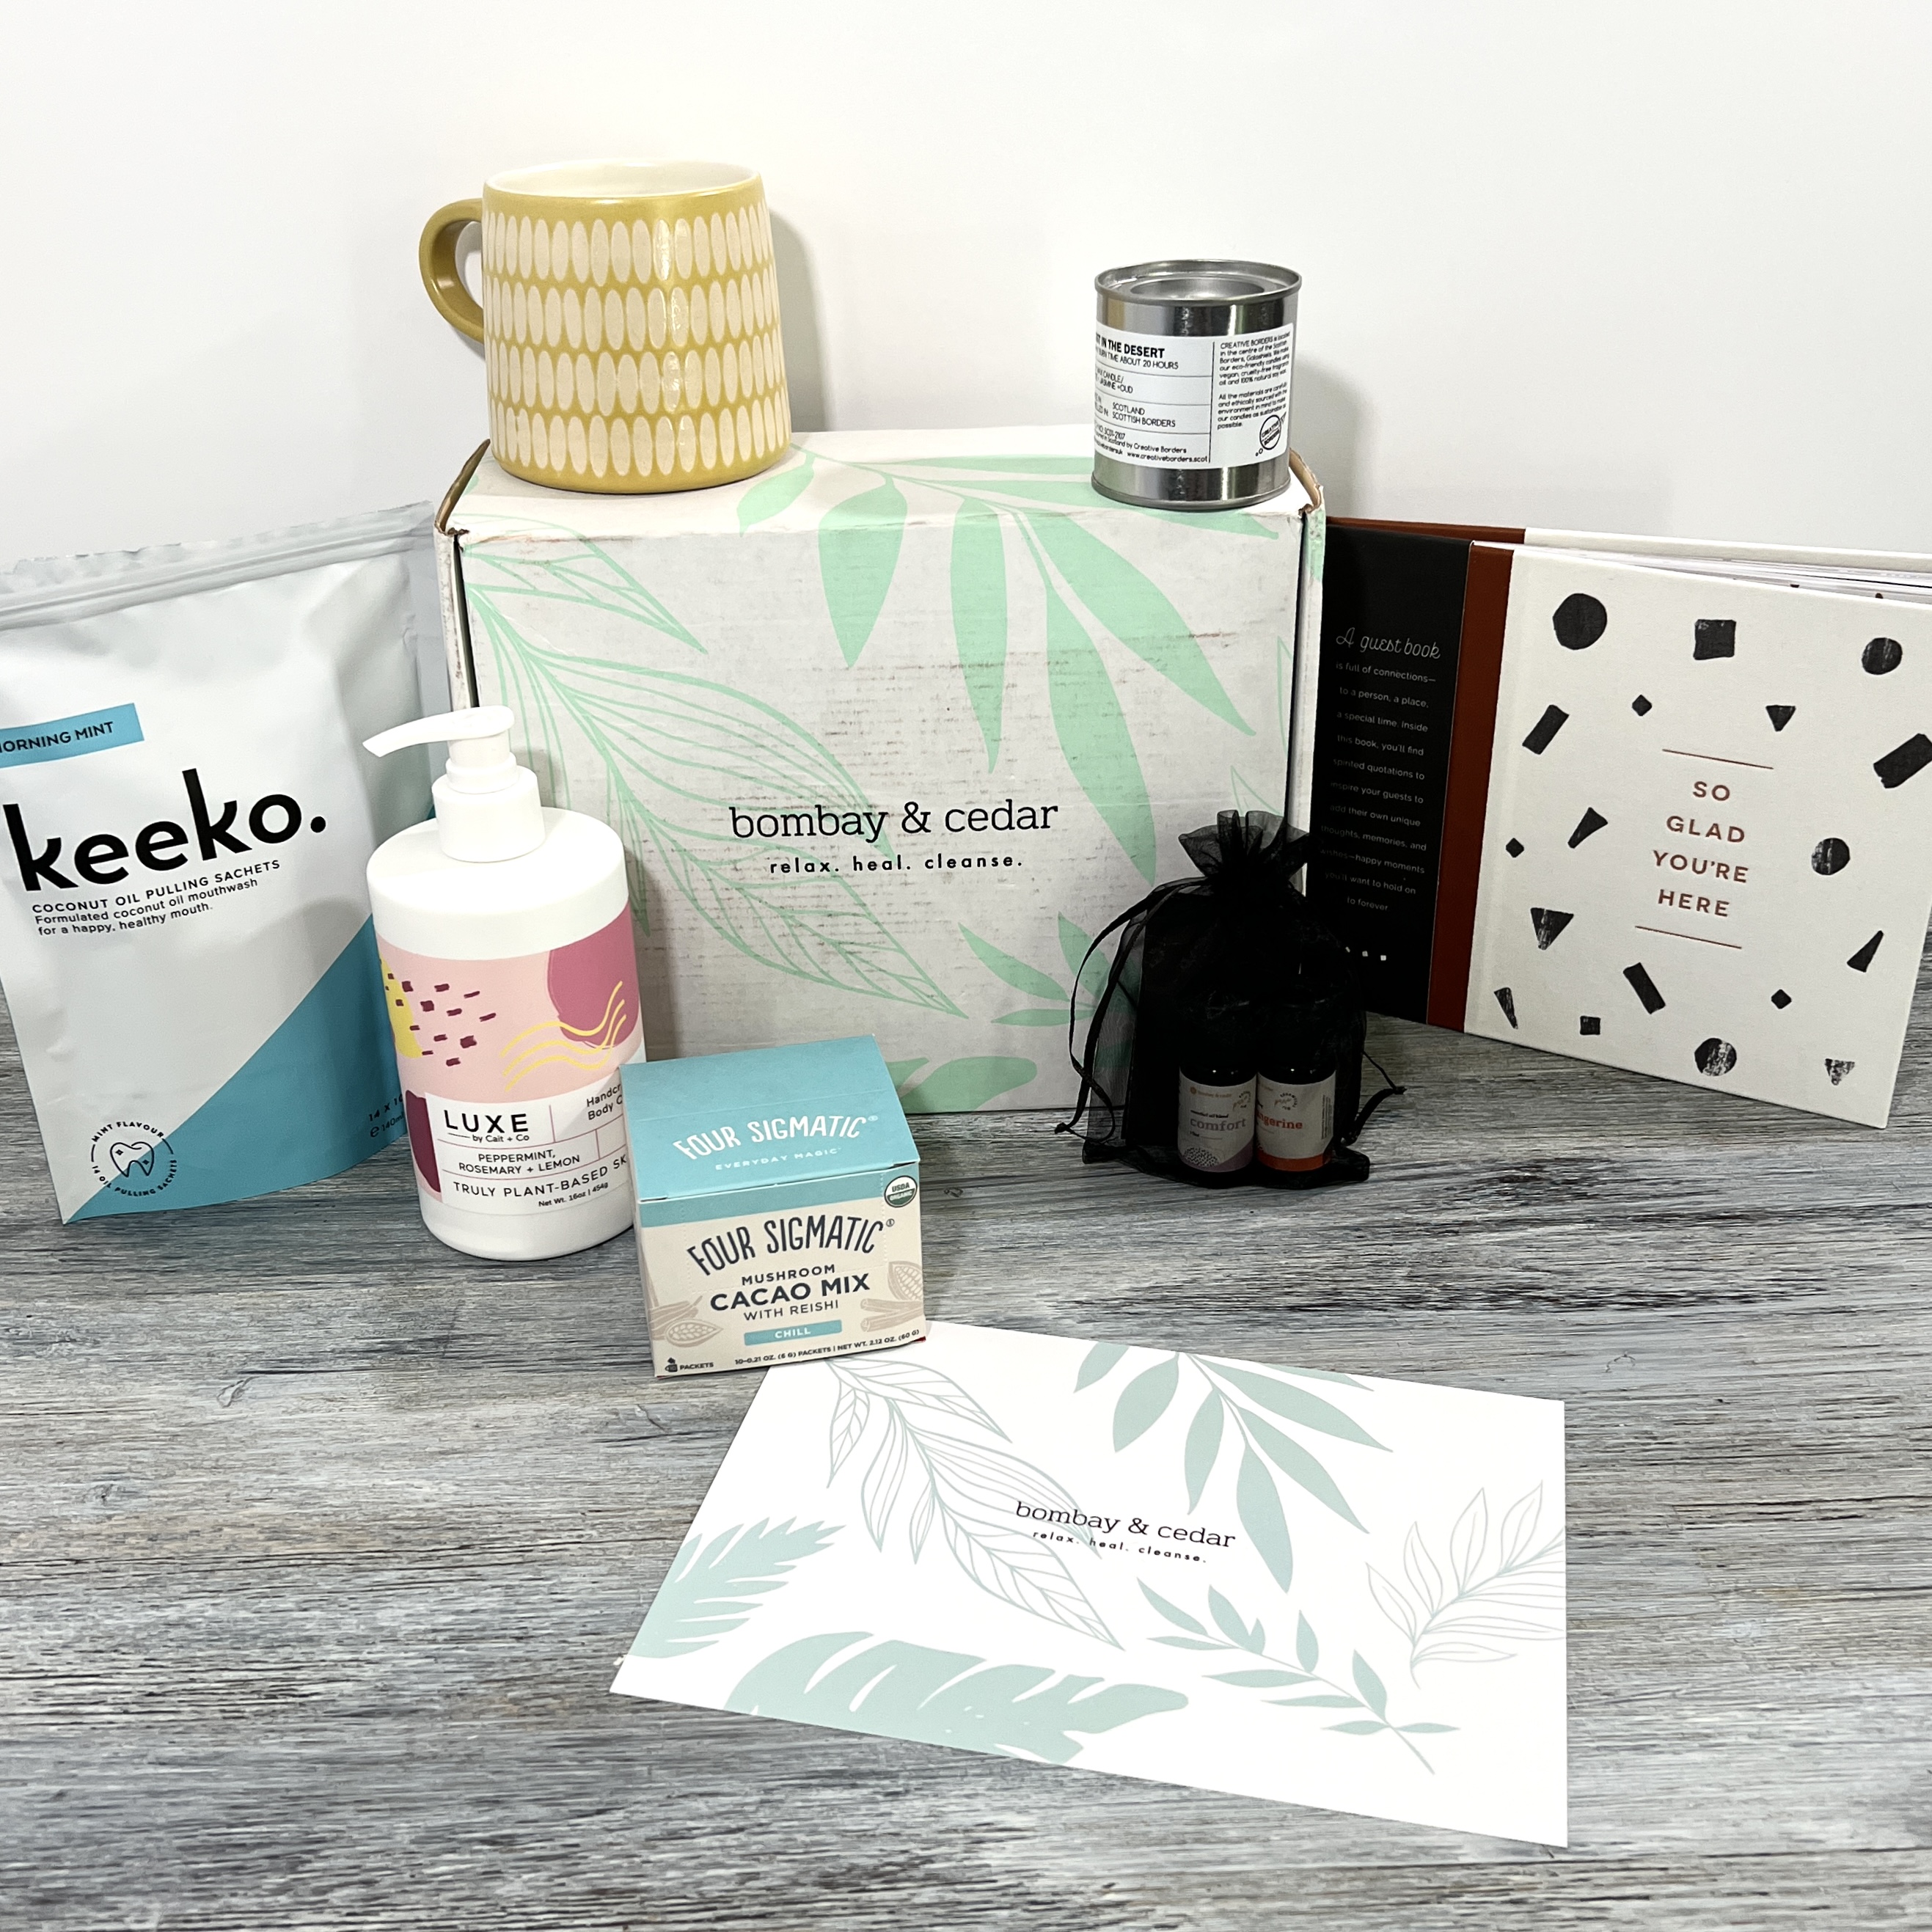 Bombay & Cedar Monthly Lifestyle Box “Joyous” December 2021 Review + Coupon